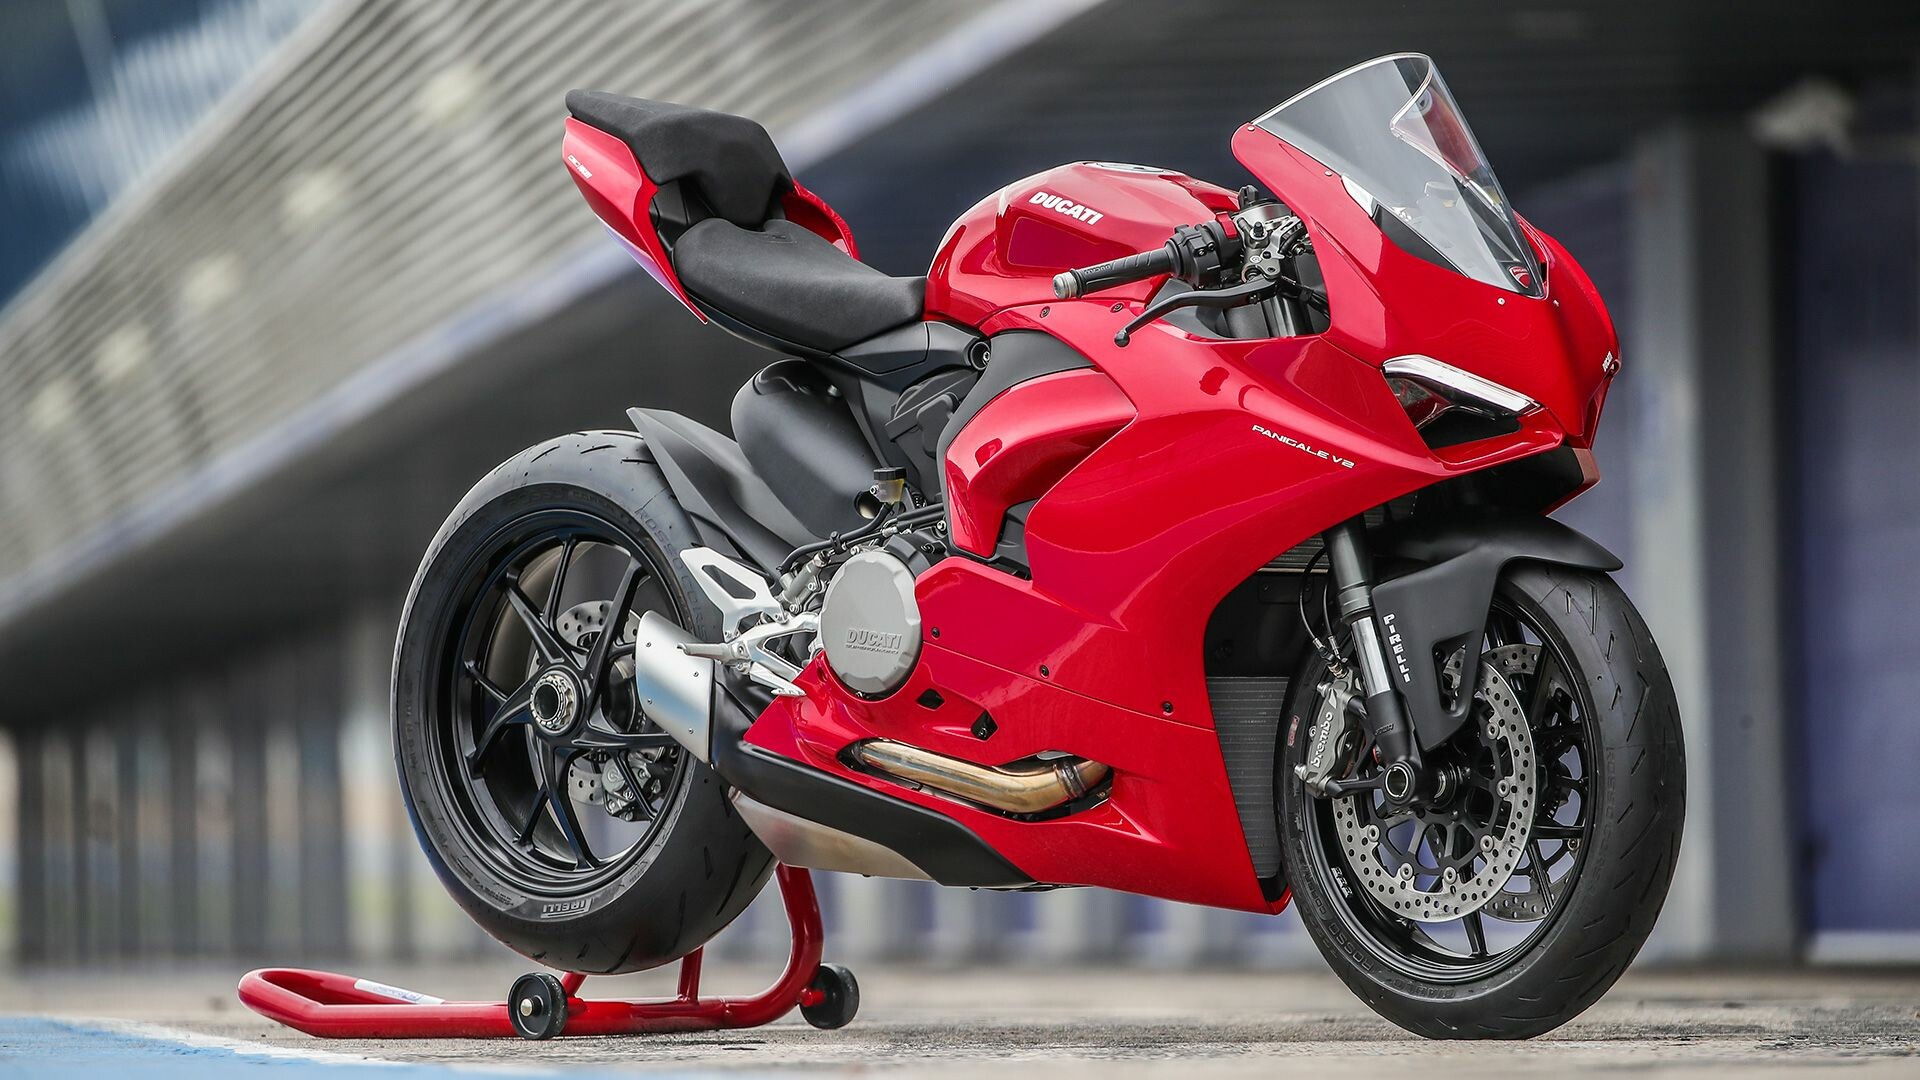 Ducati Panigale V2: V-twin engine, Model announced in 2019 for the 2020 model year. 1920x1080 Full HD Wallpaper.